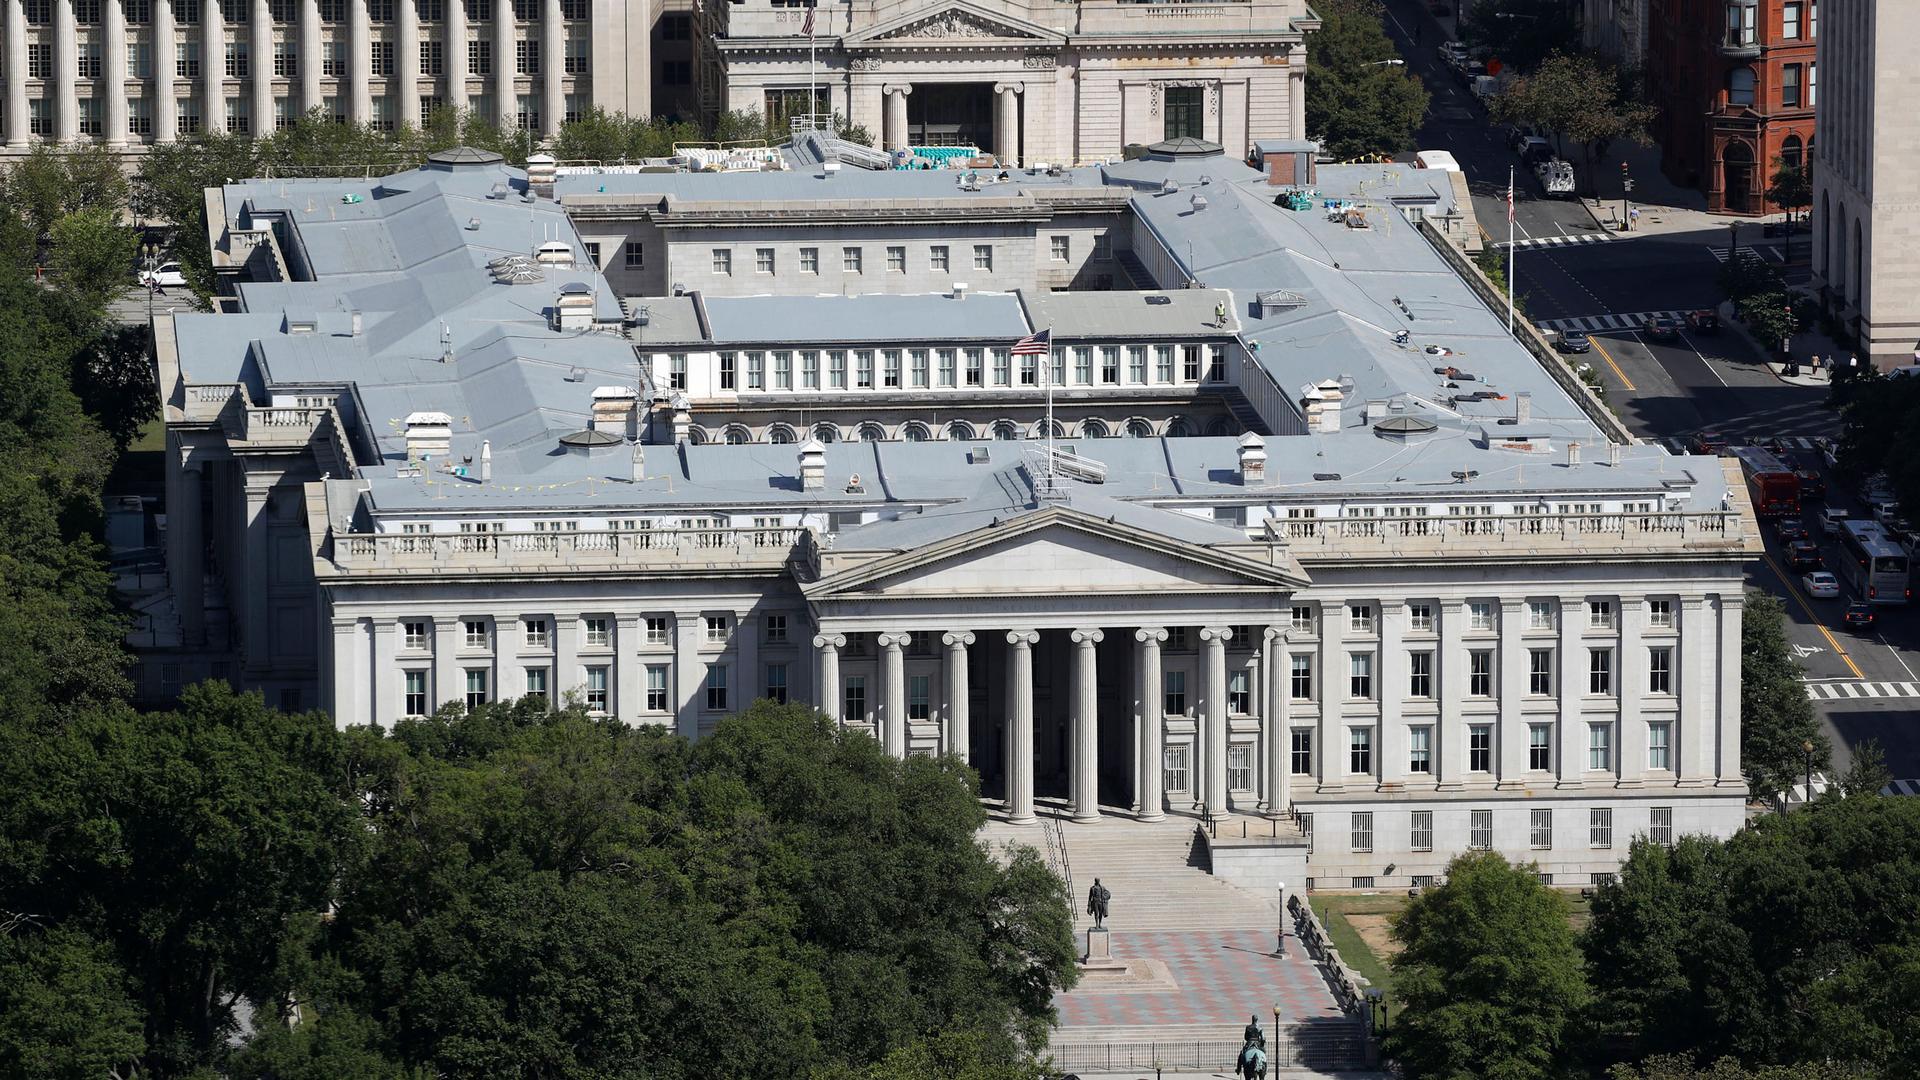 The US Treasury Department building is shown from above with its large Greek columns marking the entrance.